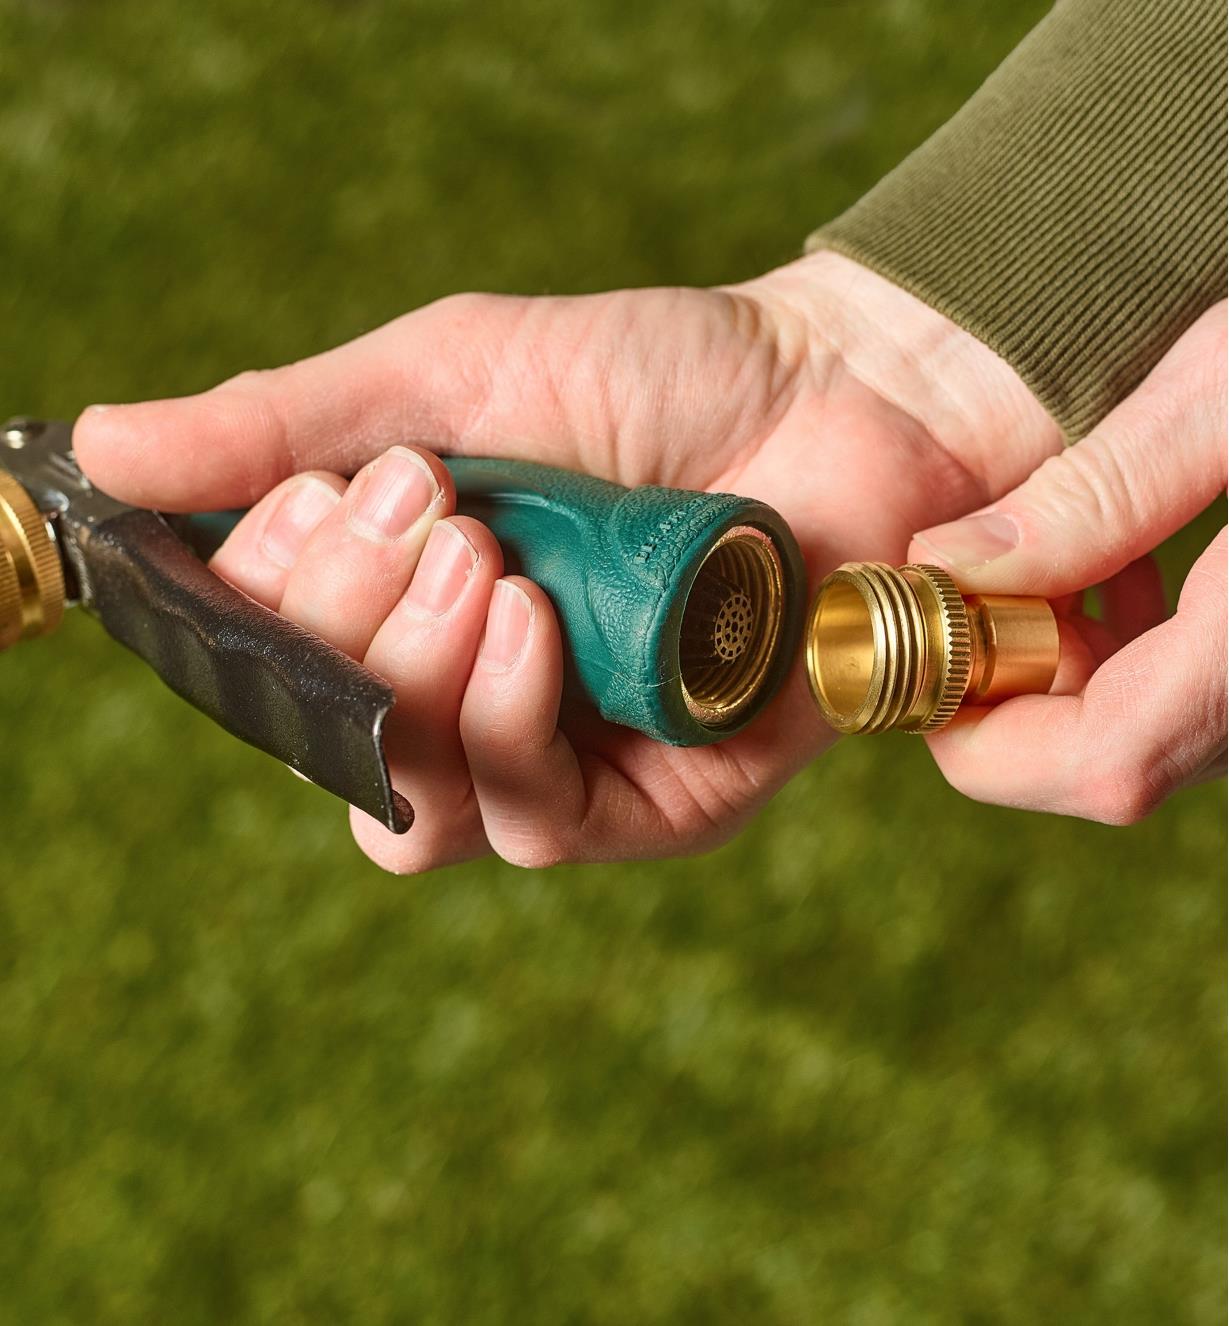 A gardener connects the brass male tool adapter to a hose nozzle